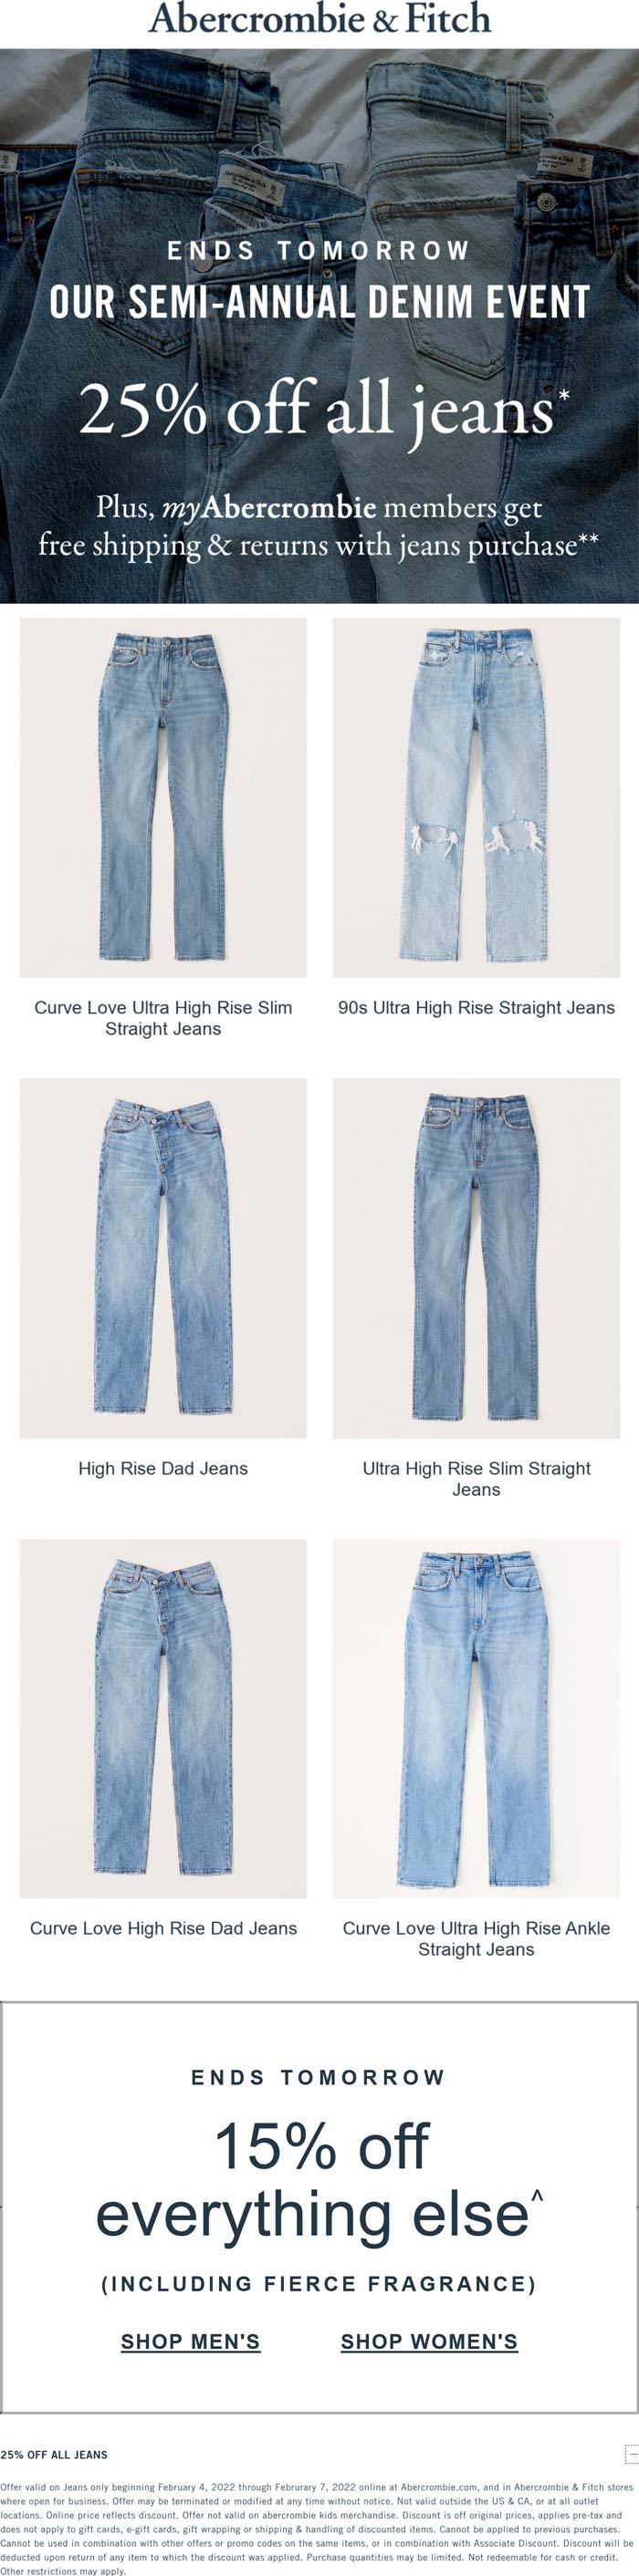 Abercrombie & Fitch stores Coupon  15% off everything & 25% off all jeans at Abercrombie & Fitch #abercrombiefitch 